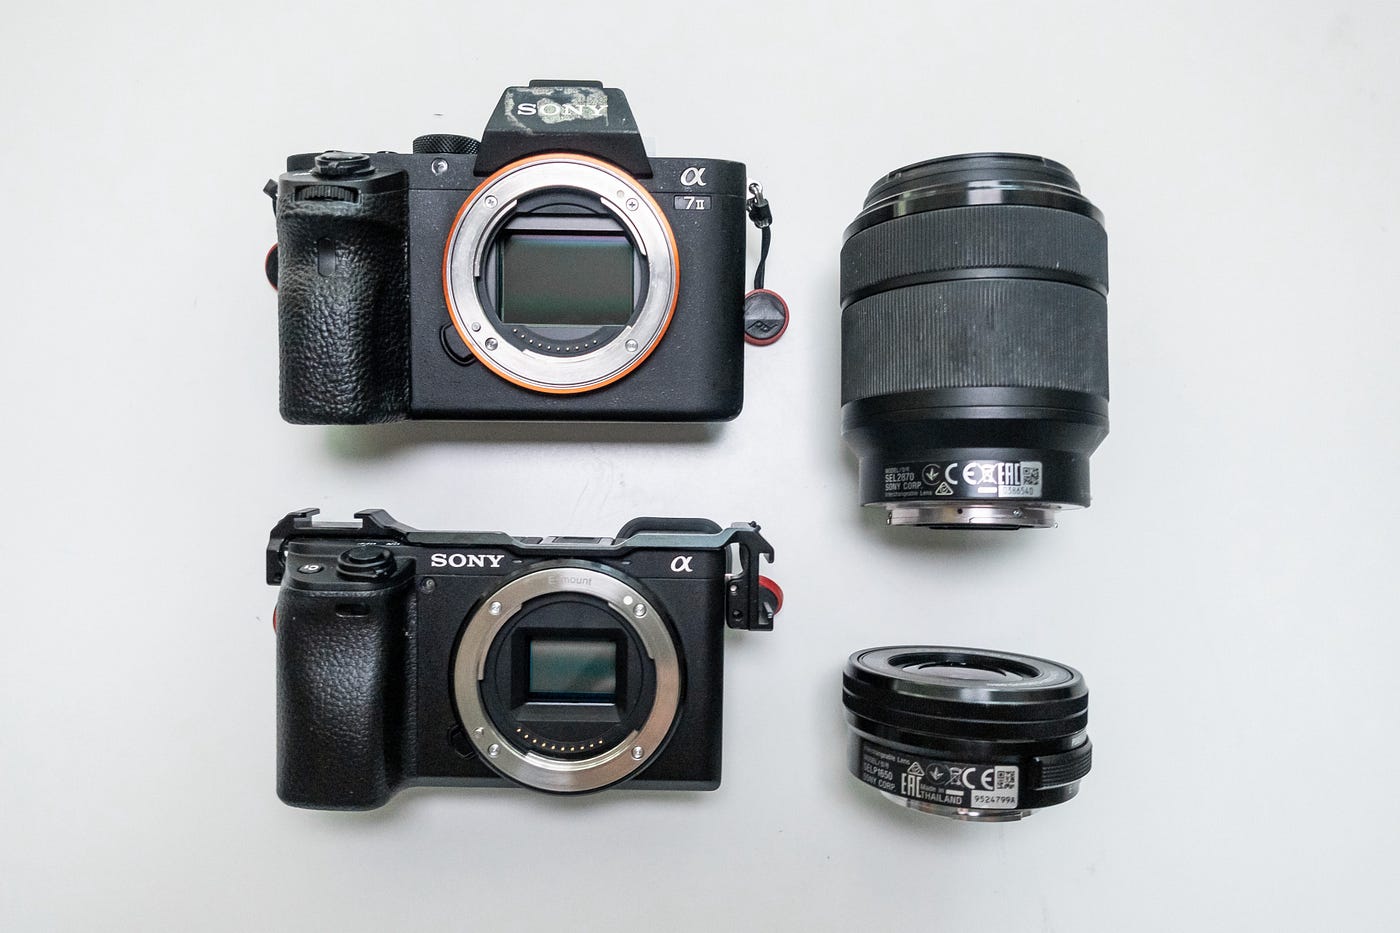 procent Afbrydelse Udled Full Frame VS APS-C Crop Cameras (Sony A7II vs A6400) | by Jameses Tech |  Jameses Tech Reviews | Medium